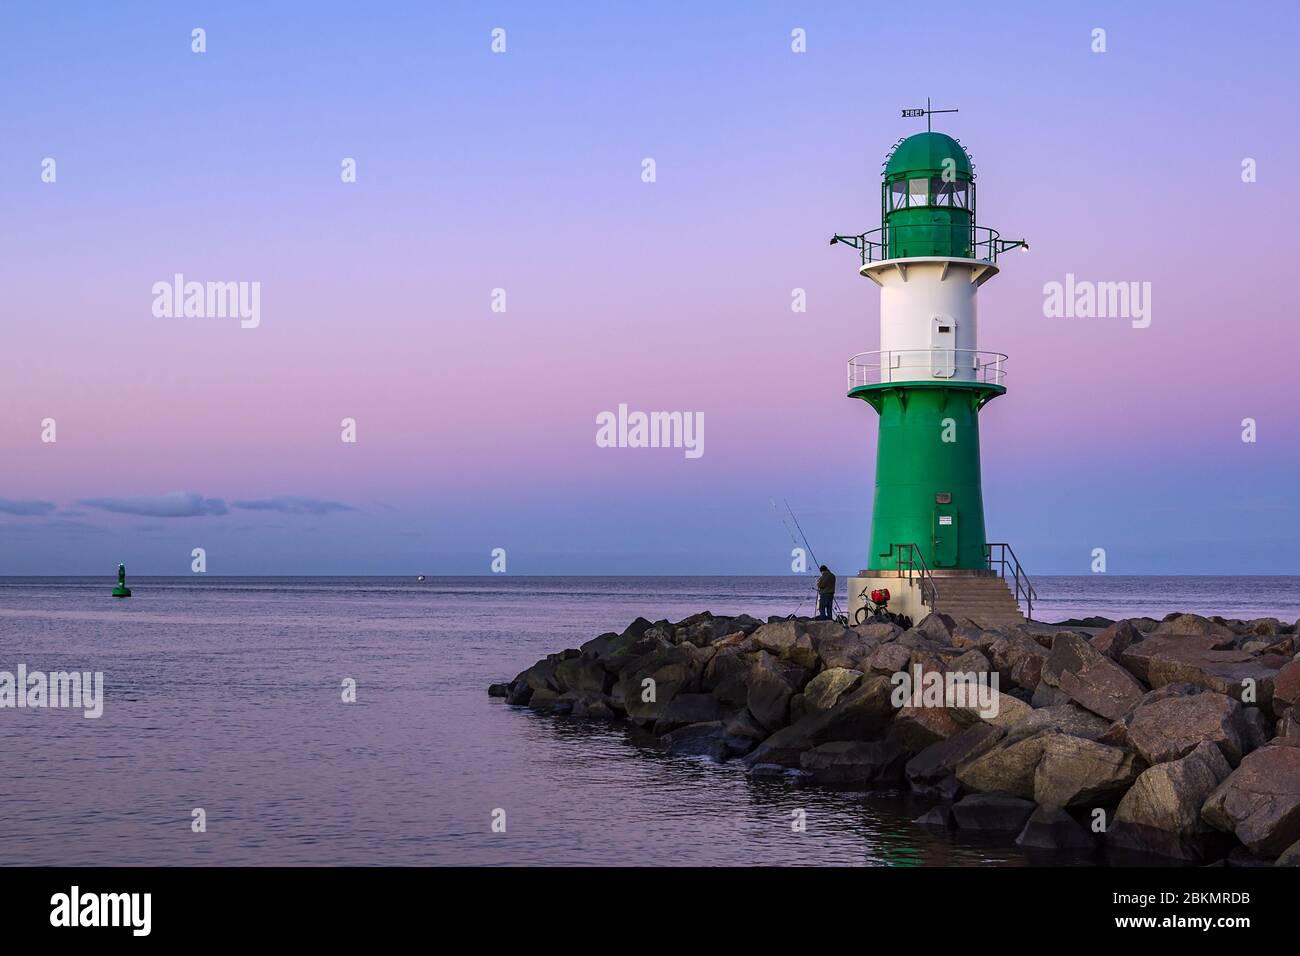 Mole on shore of the Baltic Sea in Warnemuende, Germany. Stock Photo